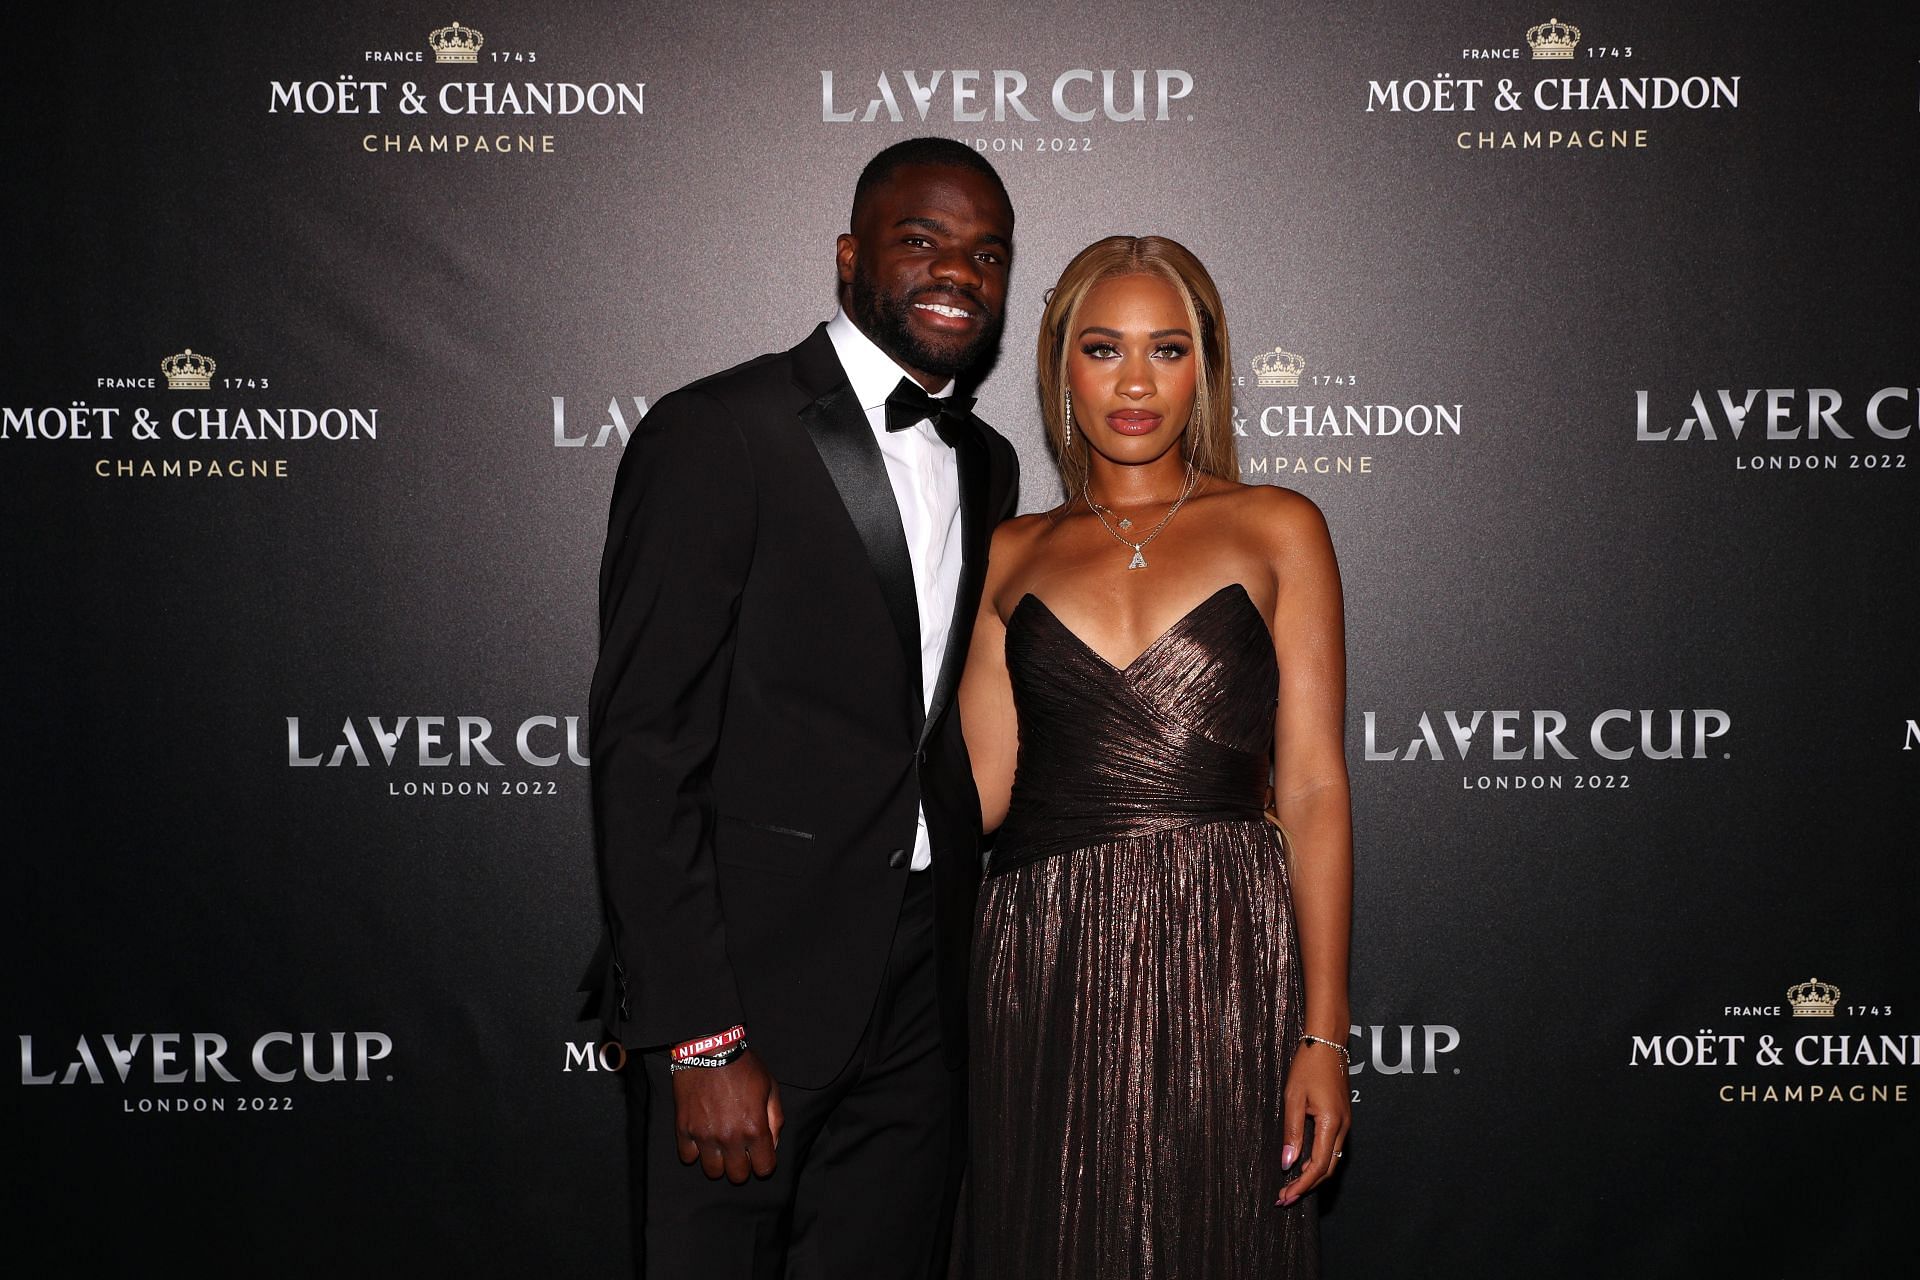 Frances Tiafoe and Ayan Broomfield at the 2022 Laver Cup